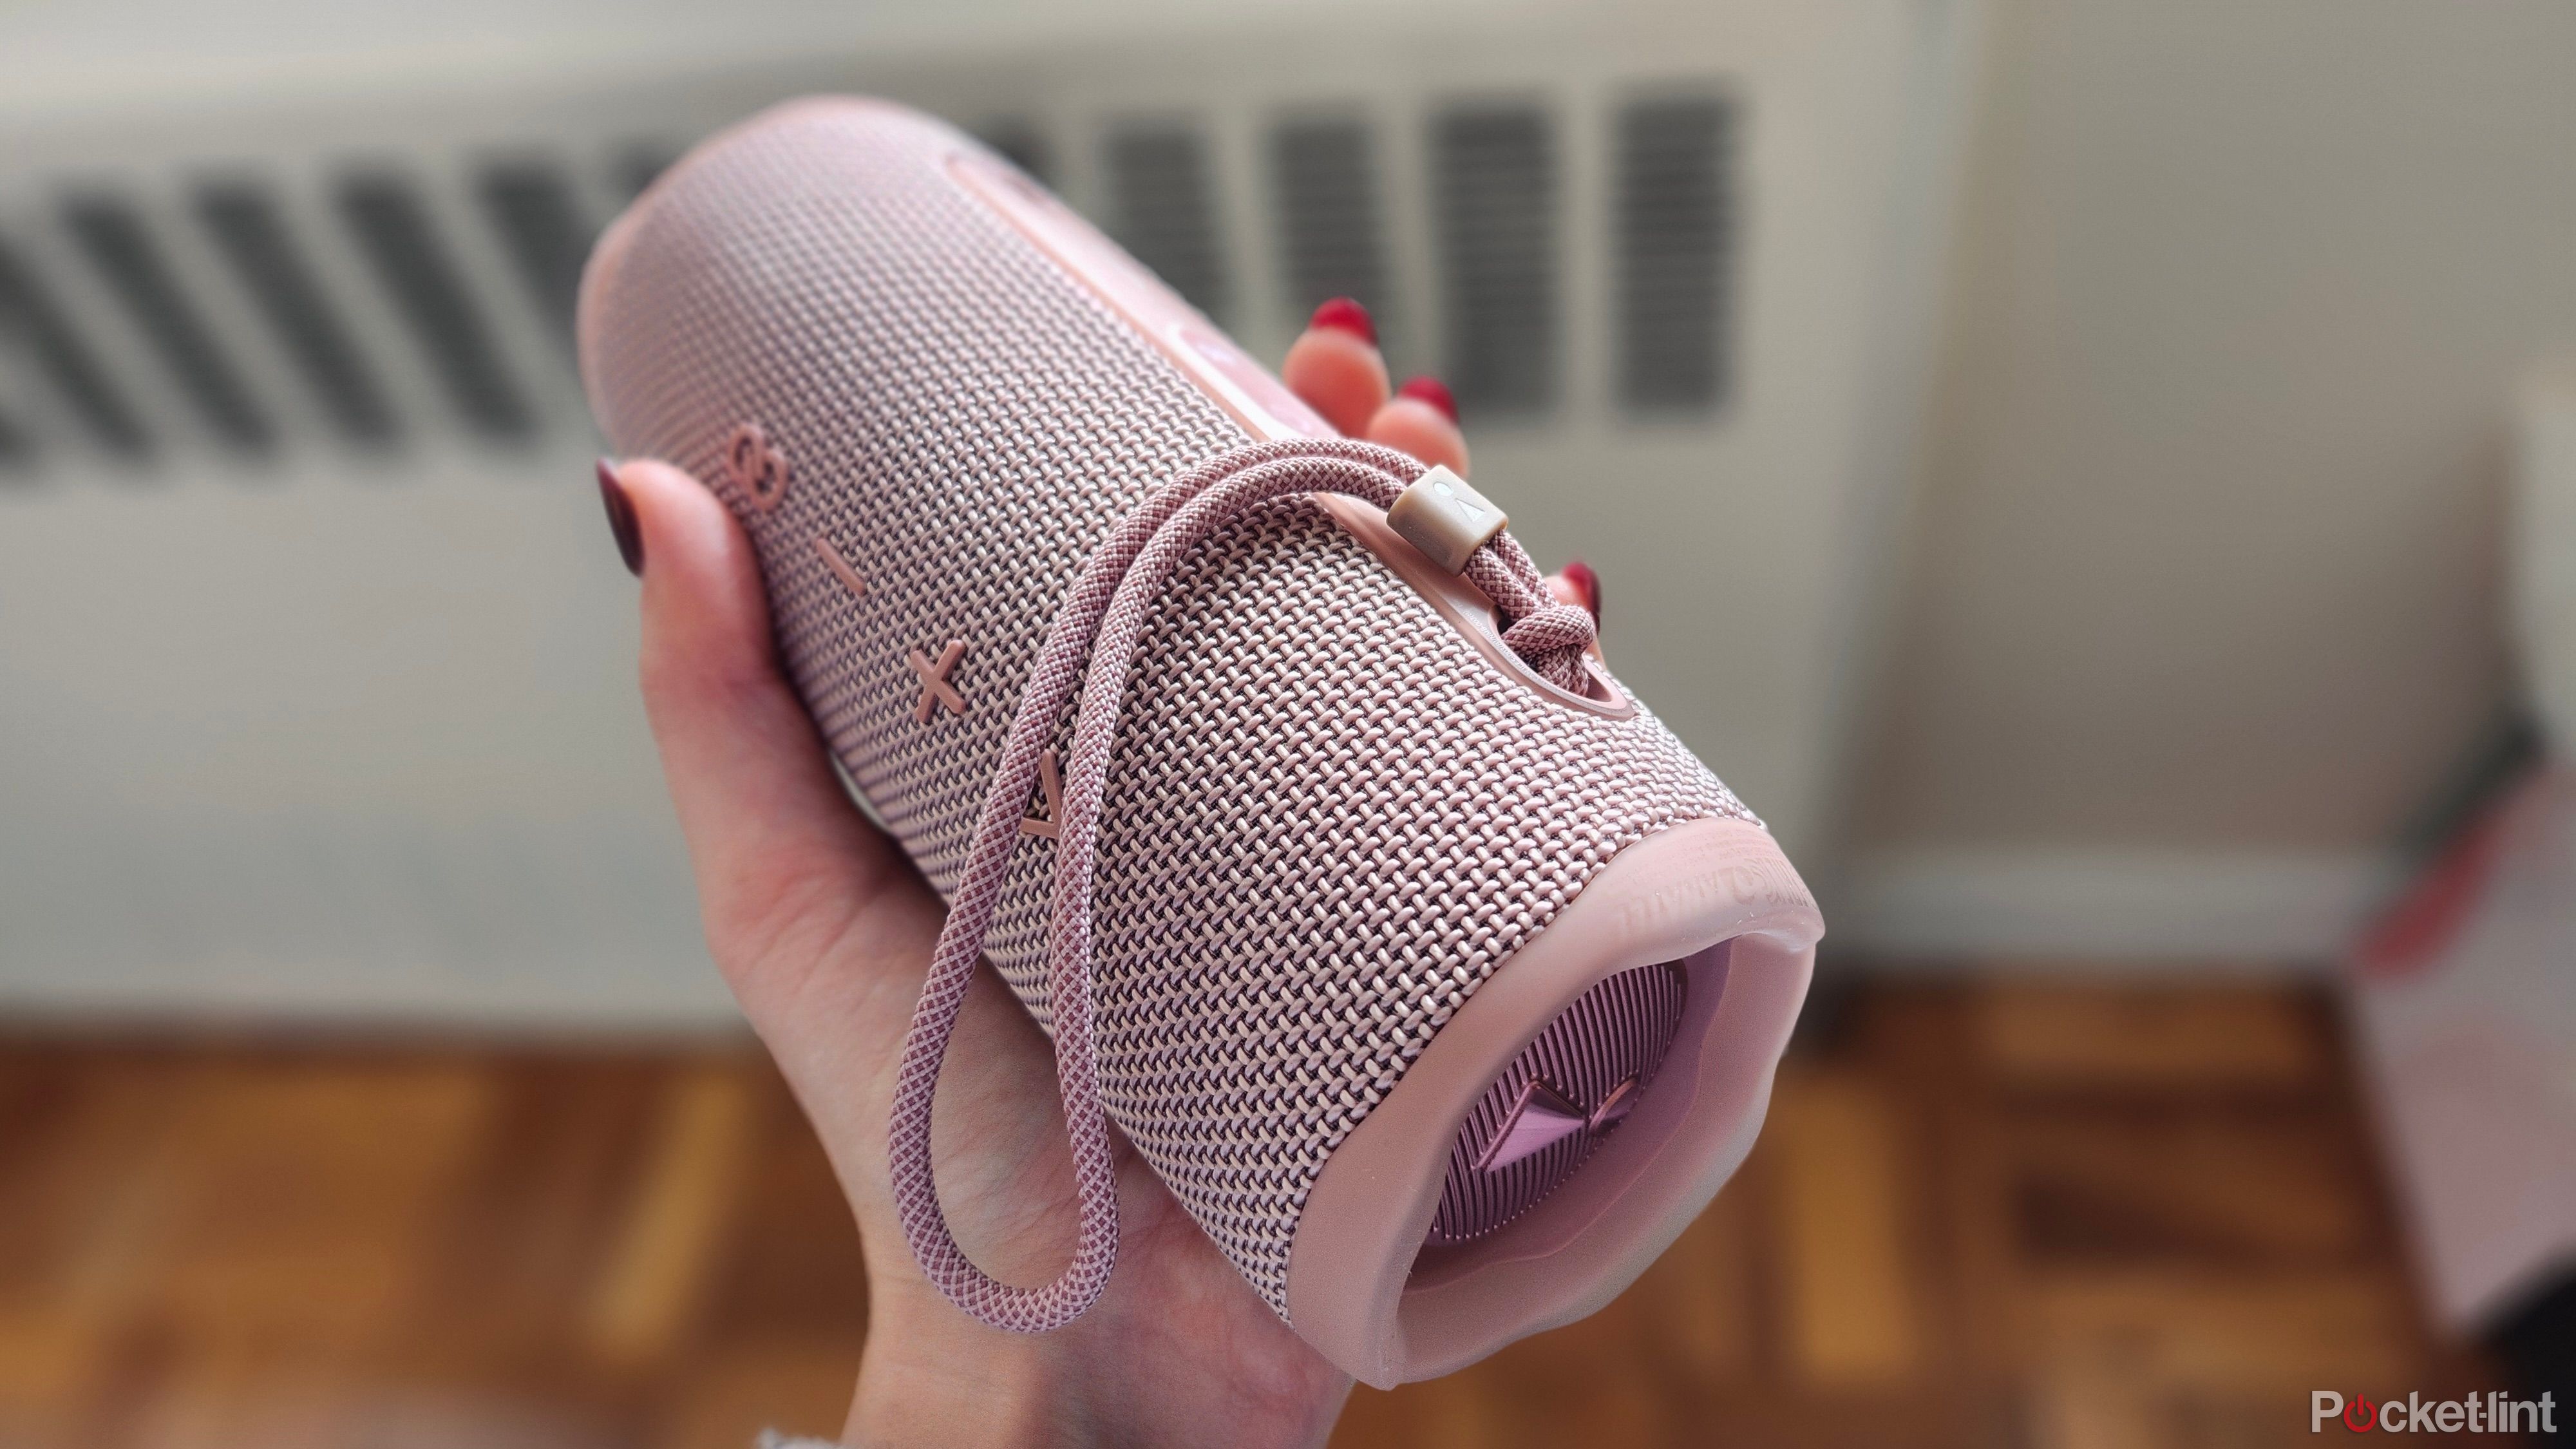 Someone with a pink JBL Flip 6